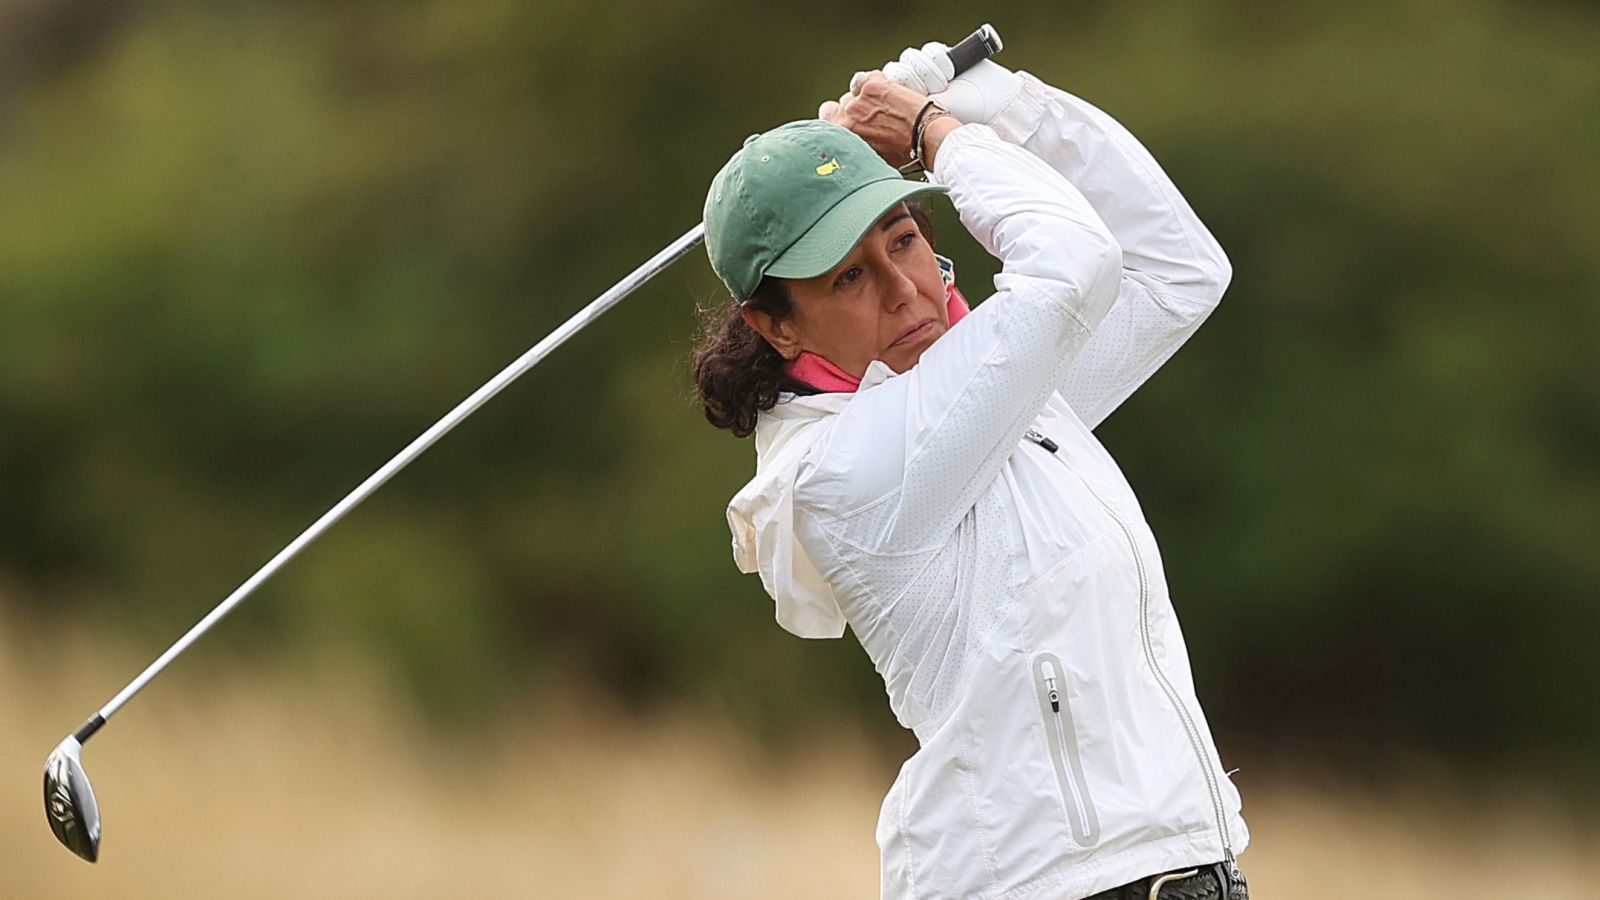 Ana Patricia Botín is the fifth woman and first Spaniard to join the Augusta National Golf Club.  © Oisin Keniry / Getty Images